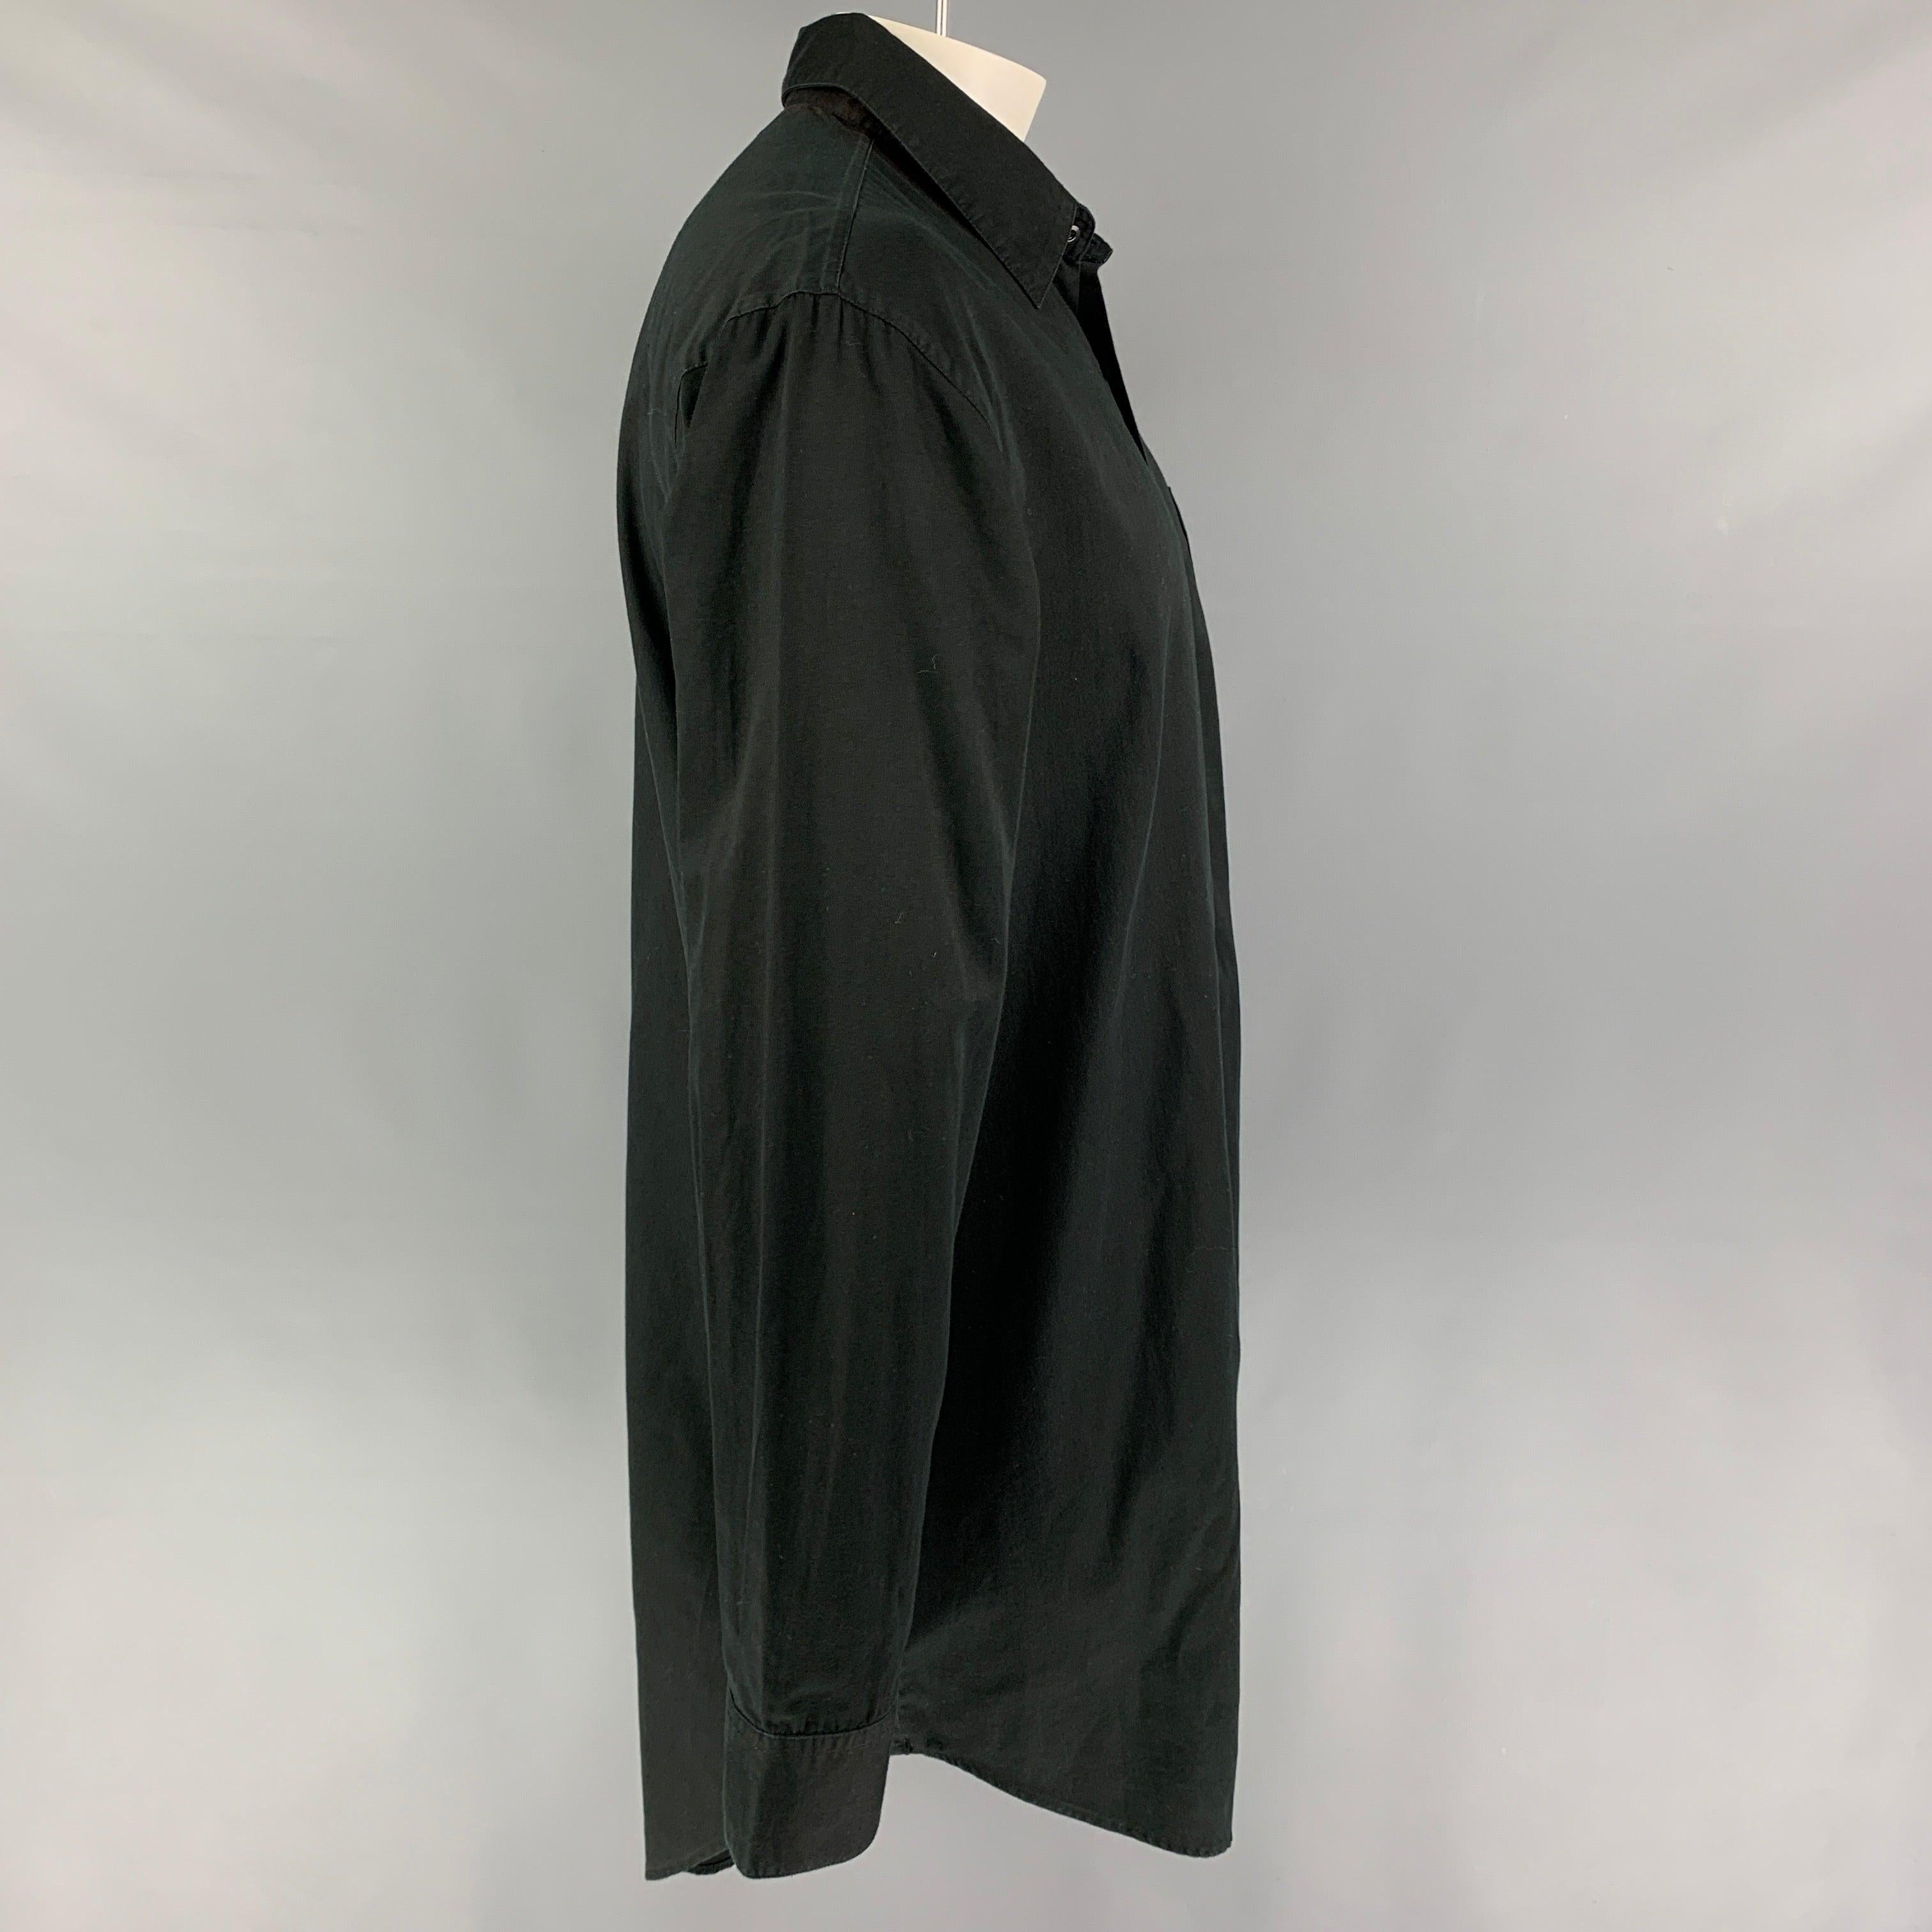 SKINGRAFT long sleeve shirt comes in a black cotton featuring a long length, back buttoned detail, patch pocket, spread collar, ad a button up closure.
Very Good
Pre-Owned Condition. 

Marked:   XL  

Measurements: 
 
Shoulder:
21.5 inches  Chest: